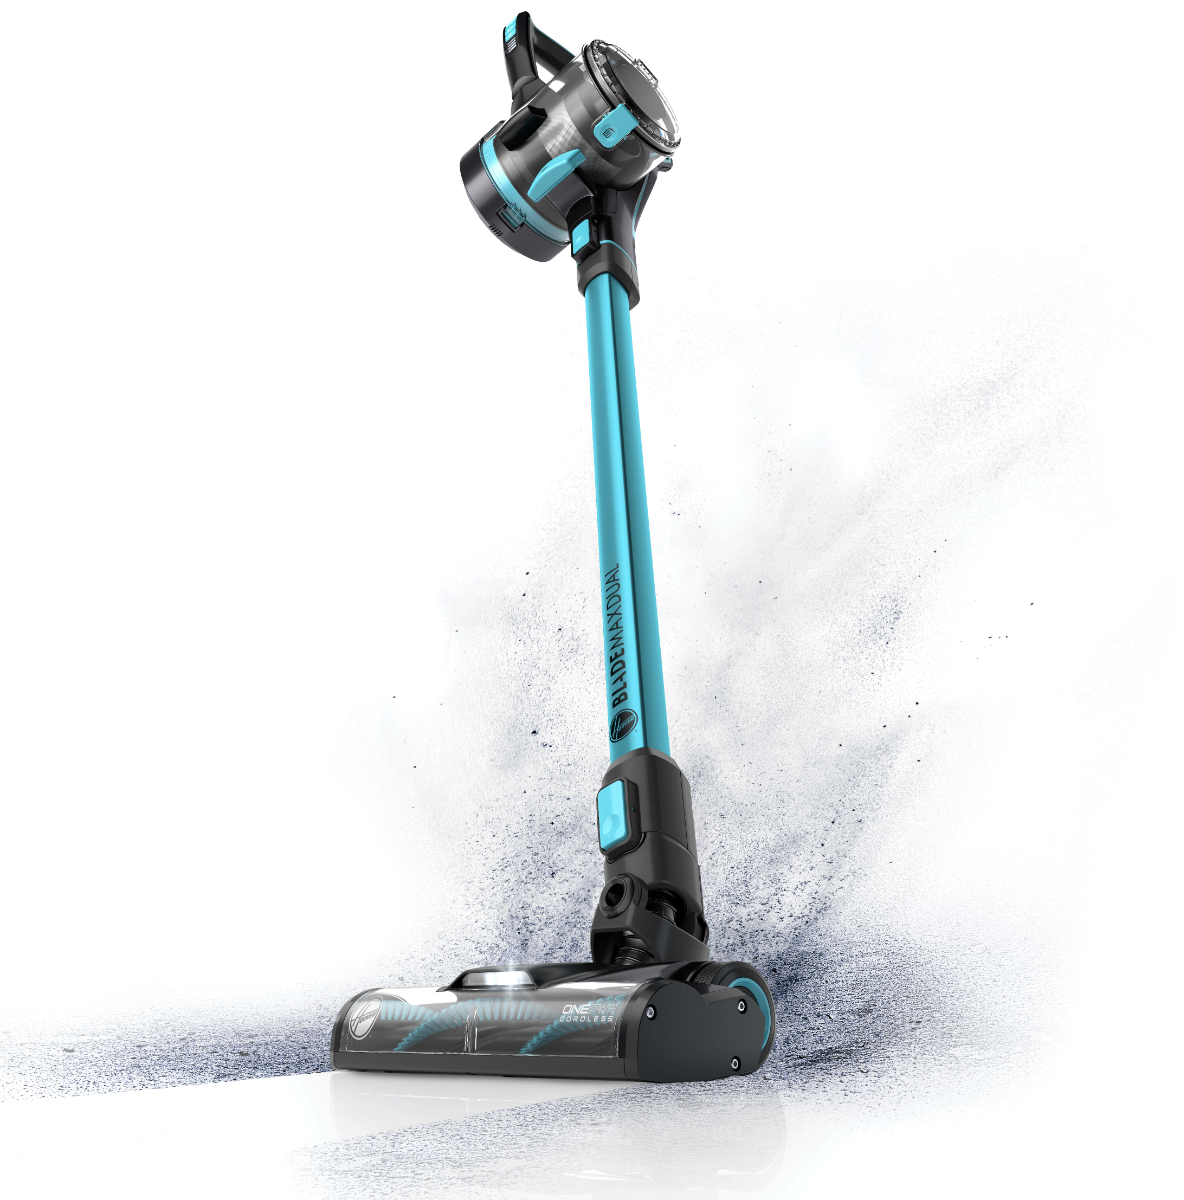 HOOVER's ONEPWR Blade Max - Hoover